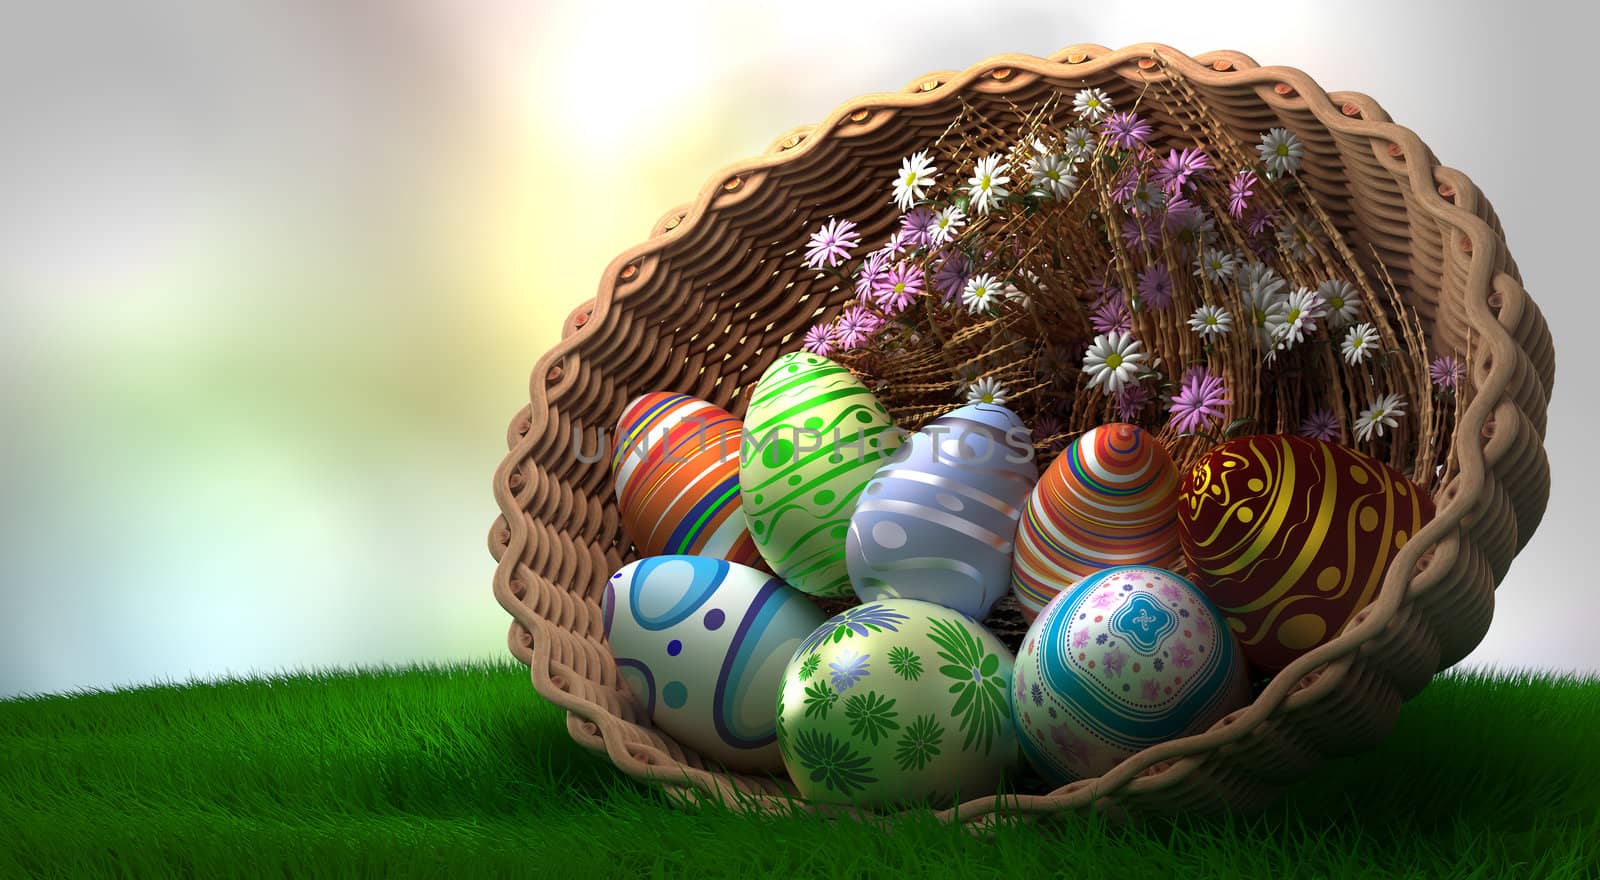 decorated Easter eggs on the grass in basket with flowers